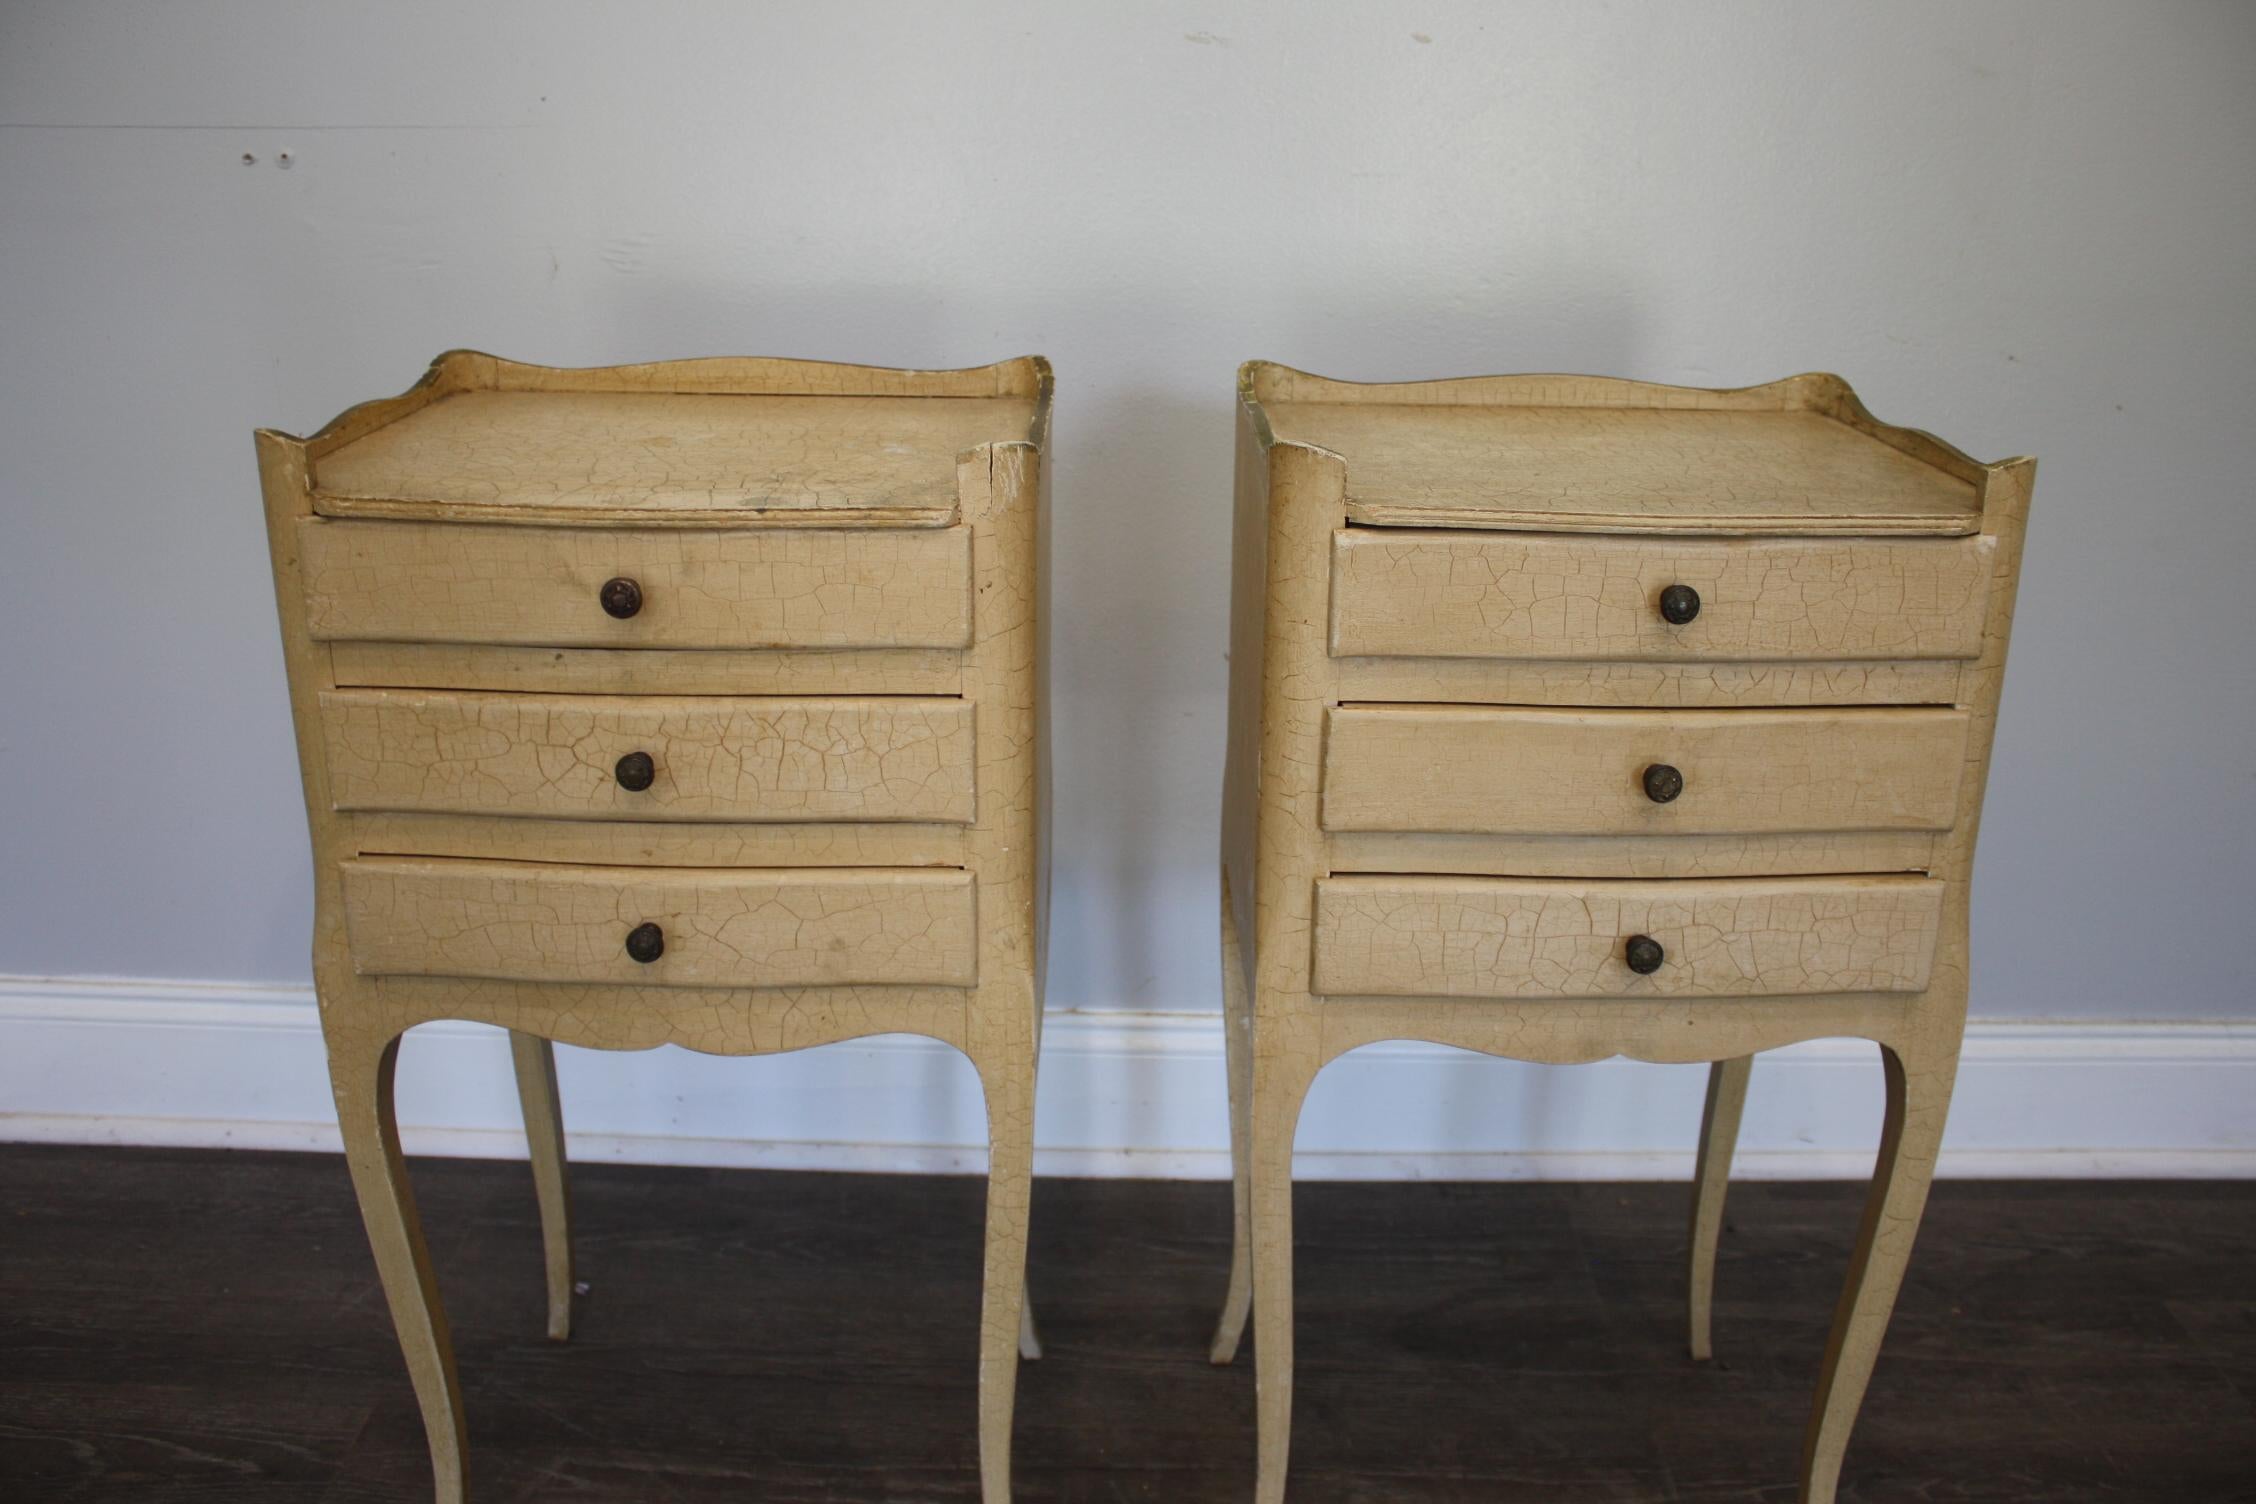 Charming pair of night stands or side tables that can be placed anywhere at home.